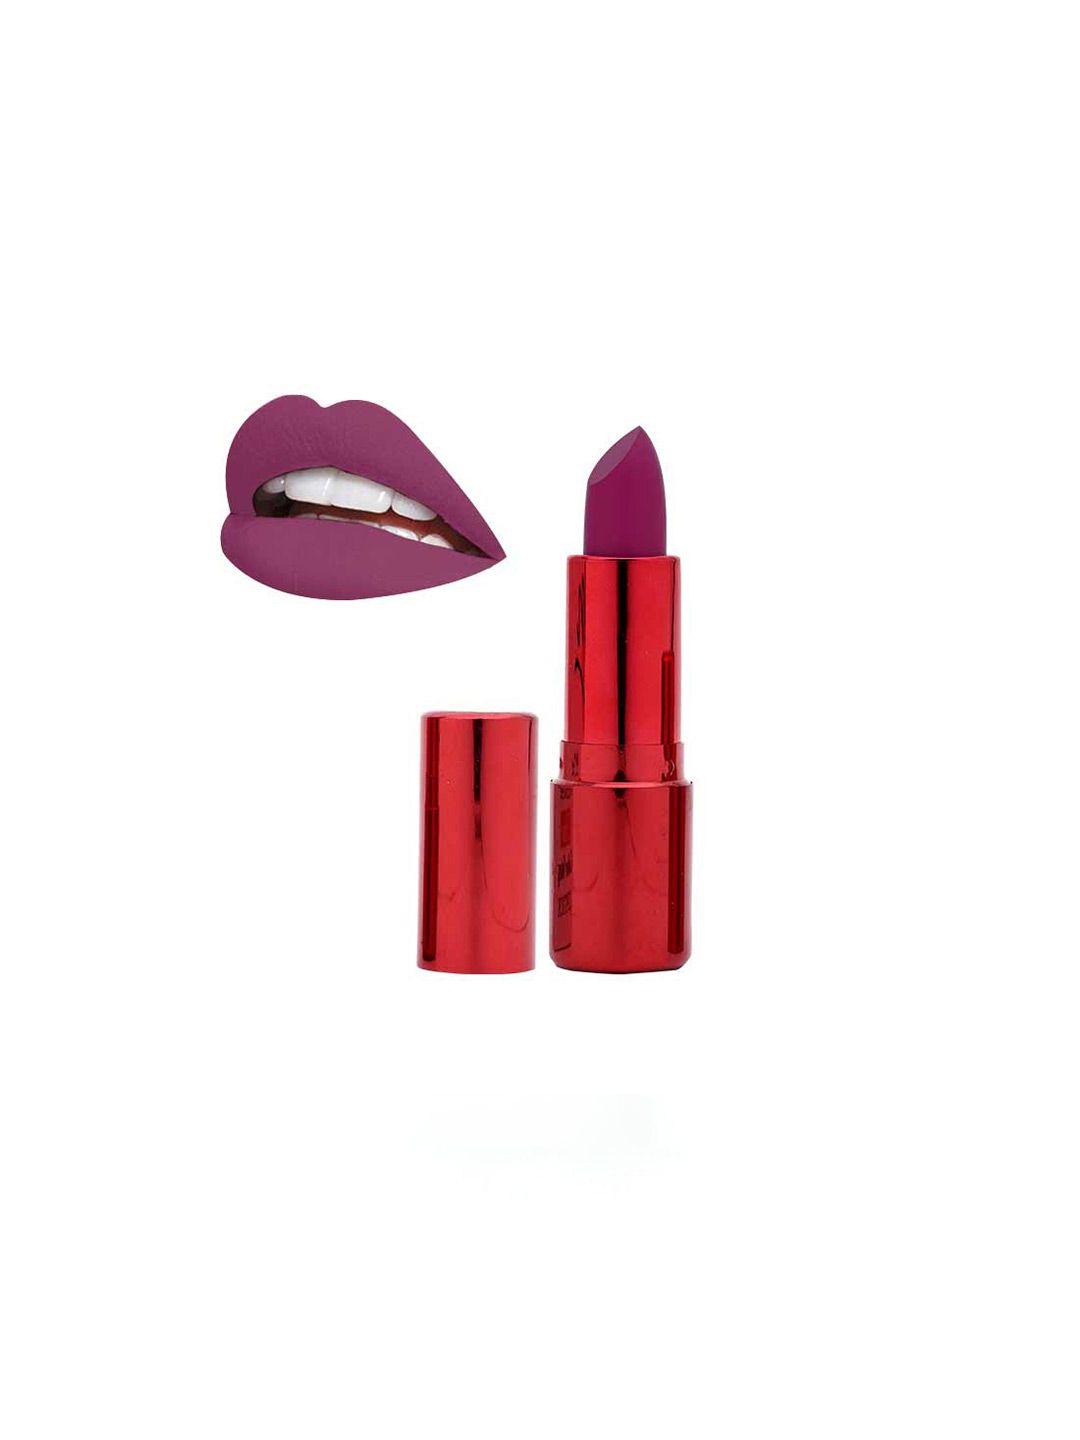 beautyrelay london 12 hour color stay lipstick with vitamin c 3.5g - sweet cherry